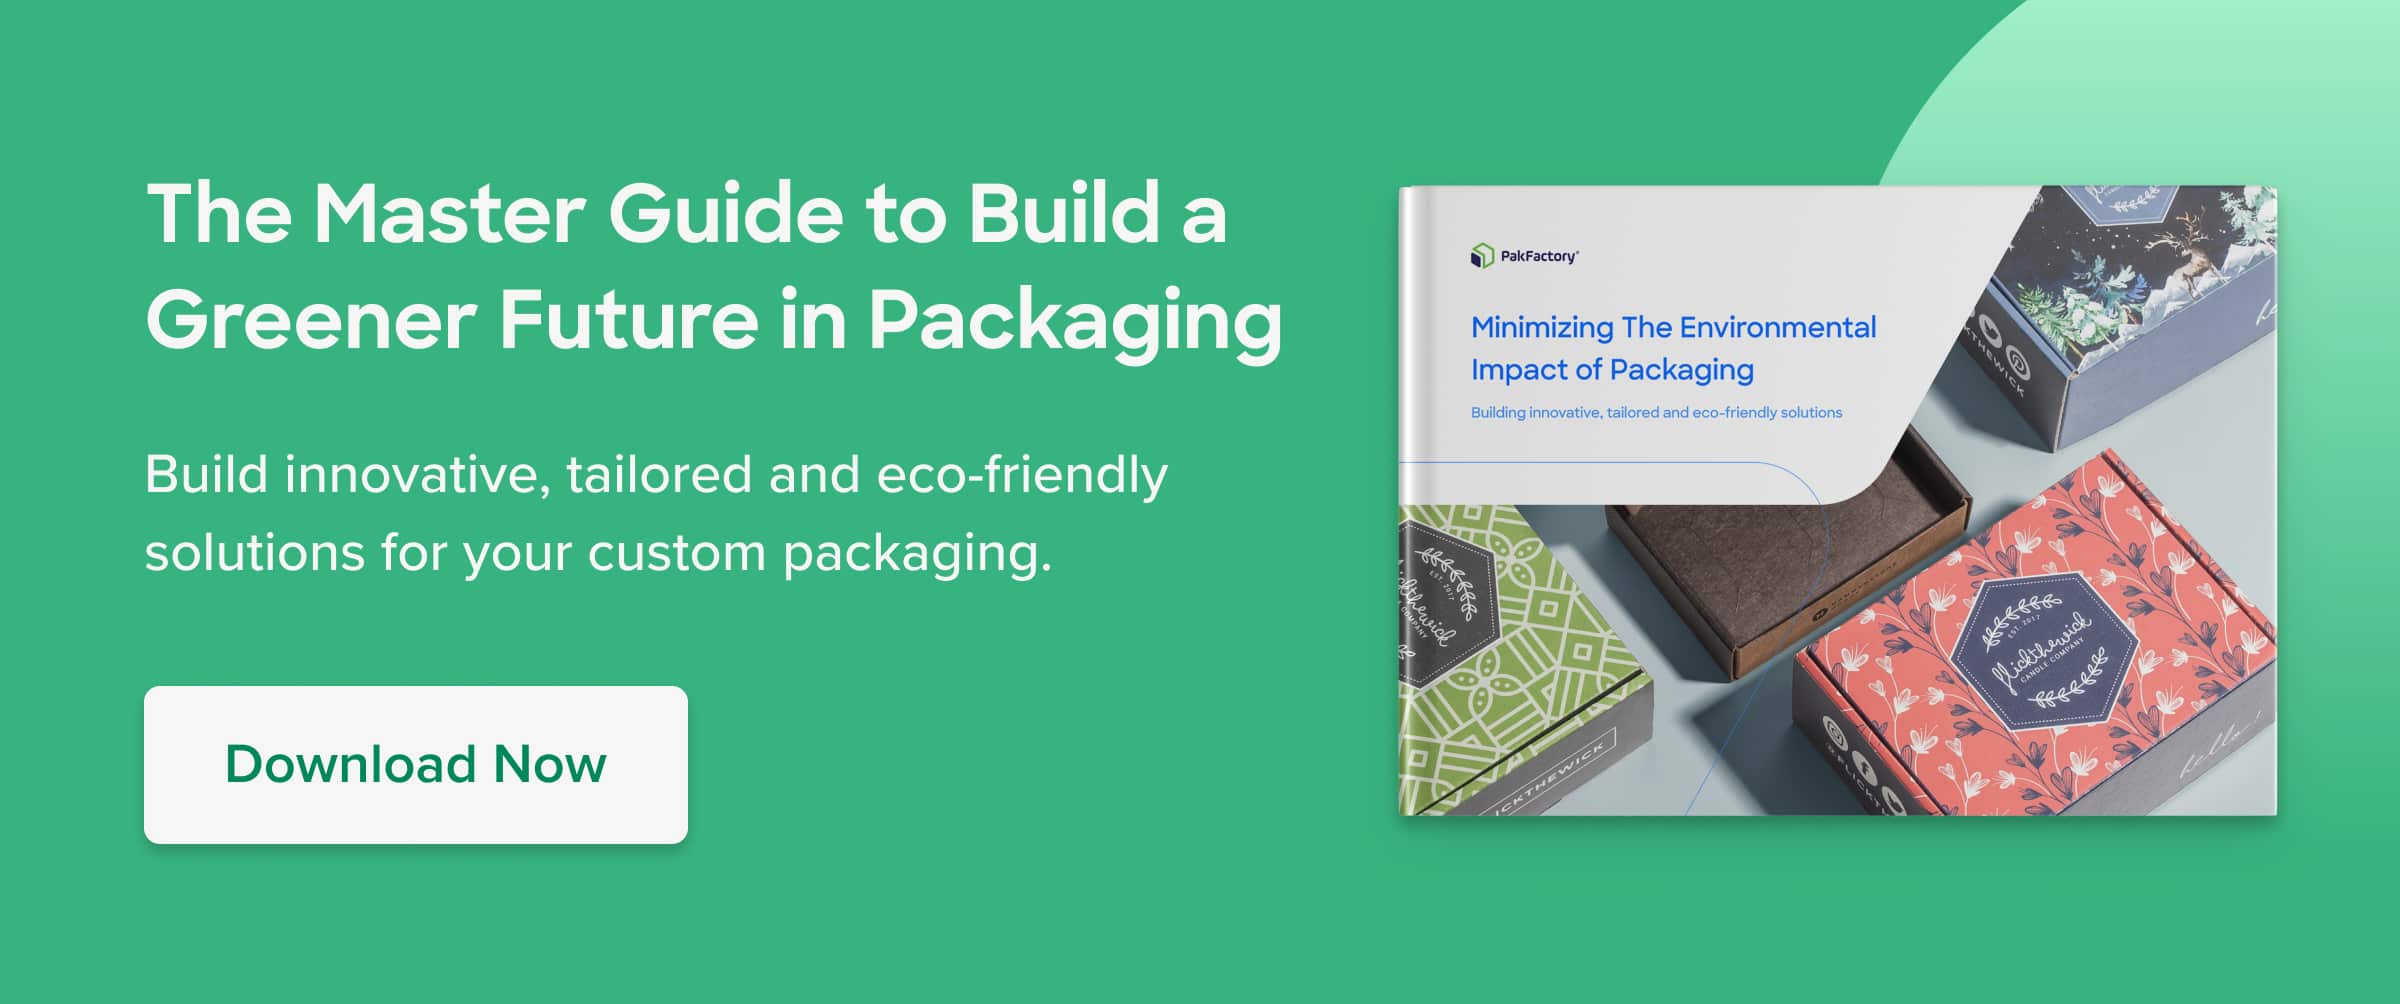 Download the master guide on how to minimize the environmental impact of packaging